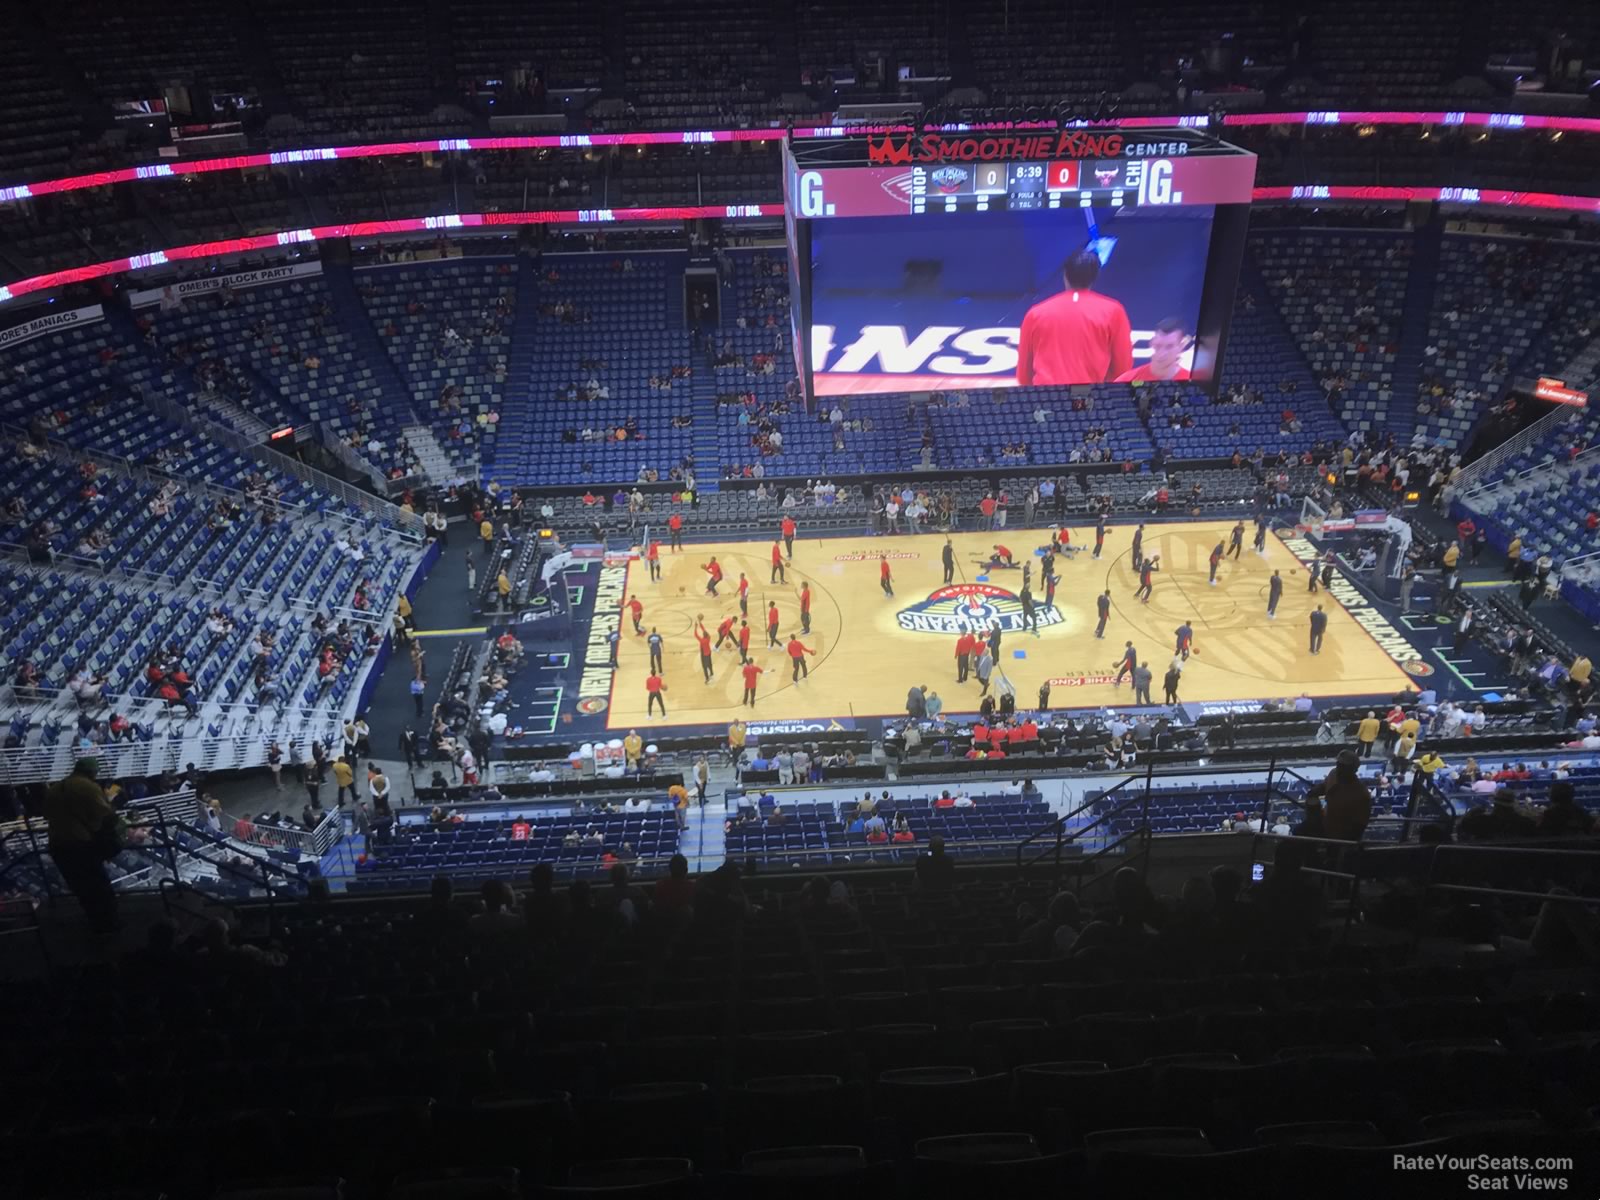 section 317, row 16 seat view  for basketball - smoothie king center